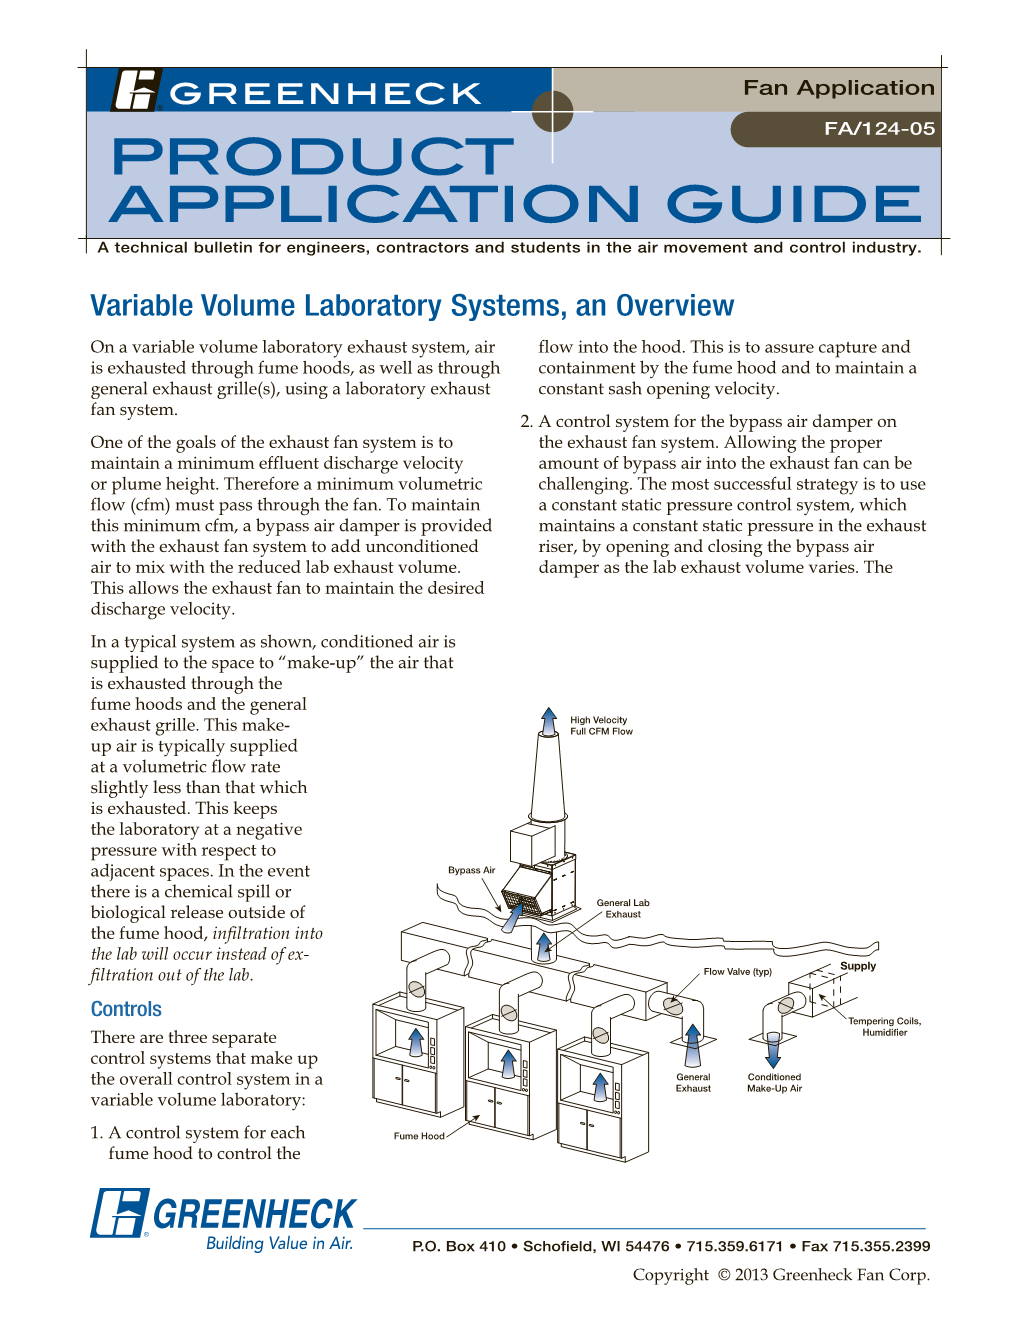 Variable Volume Laboratory Systems, an Overview